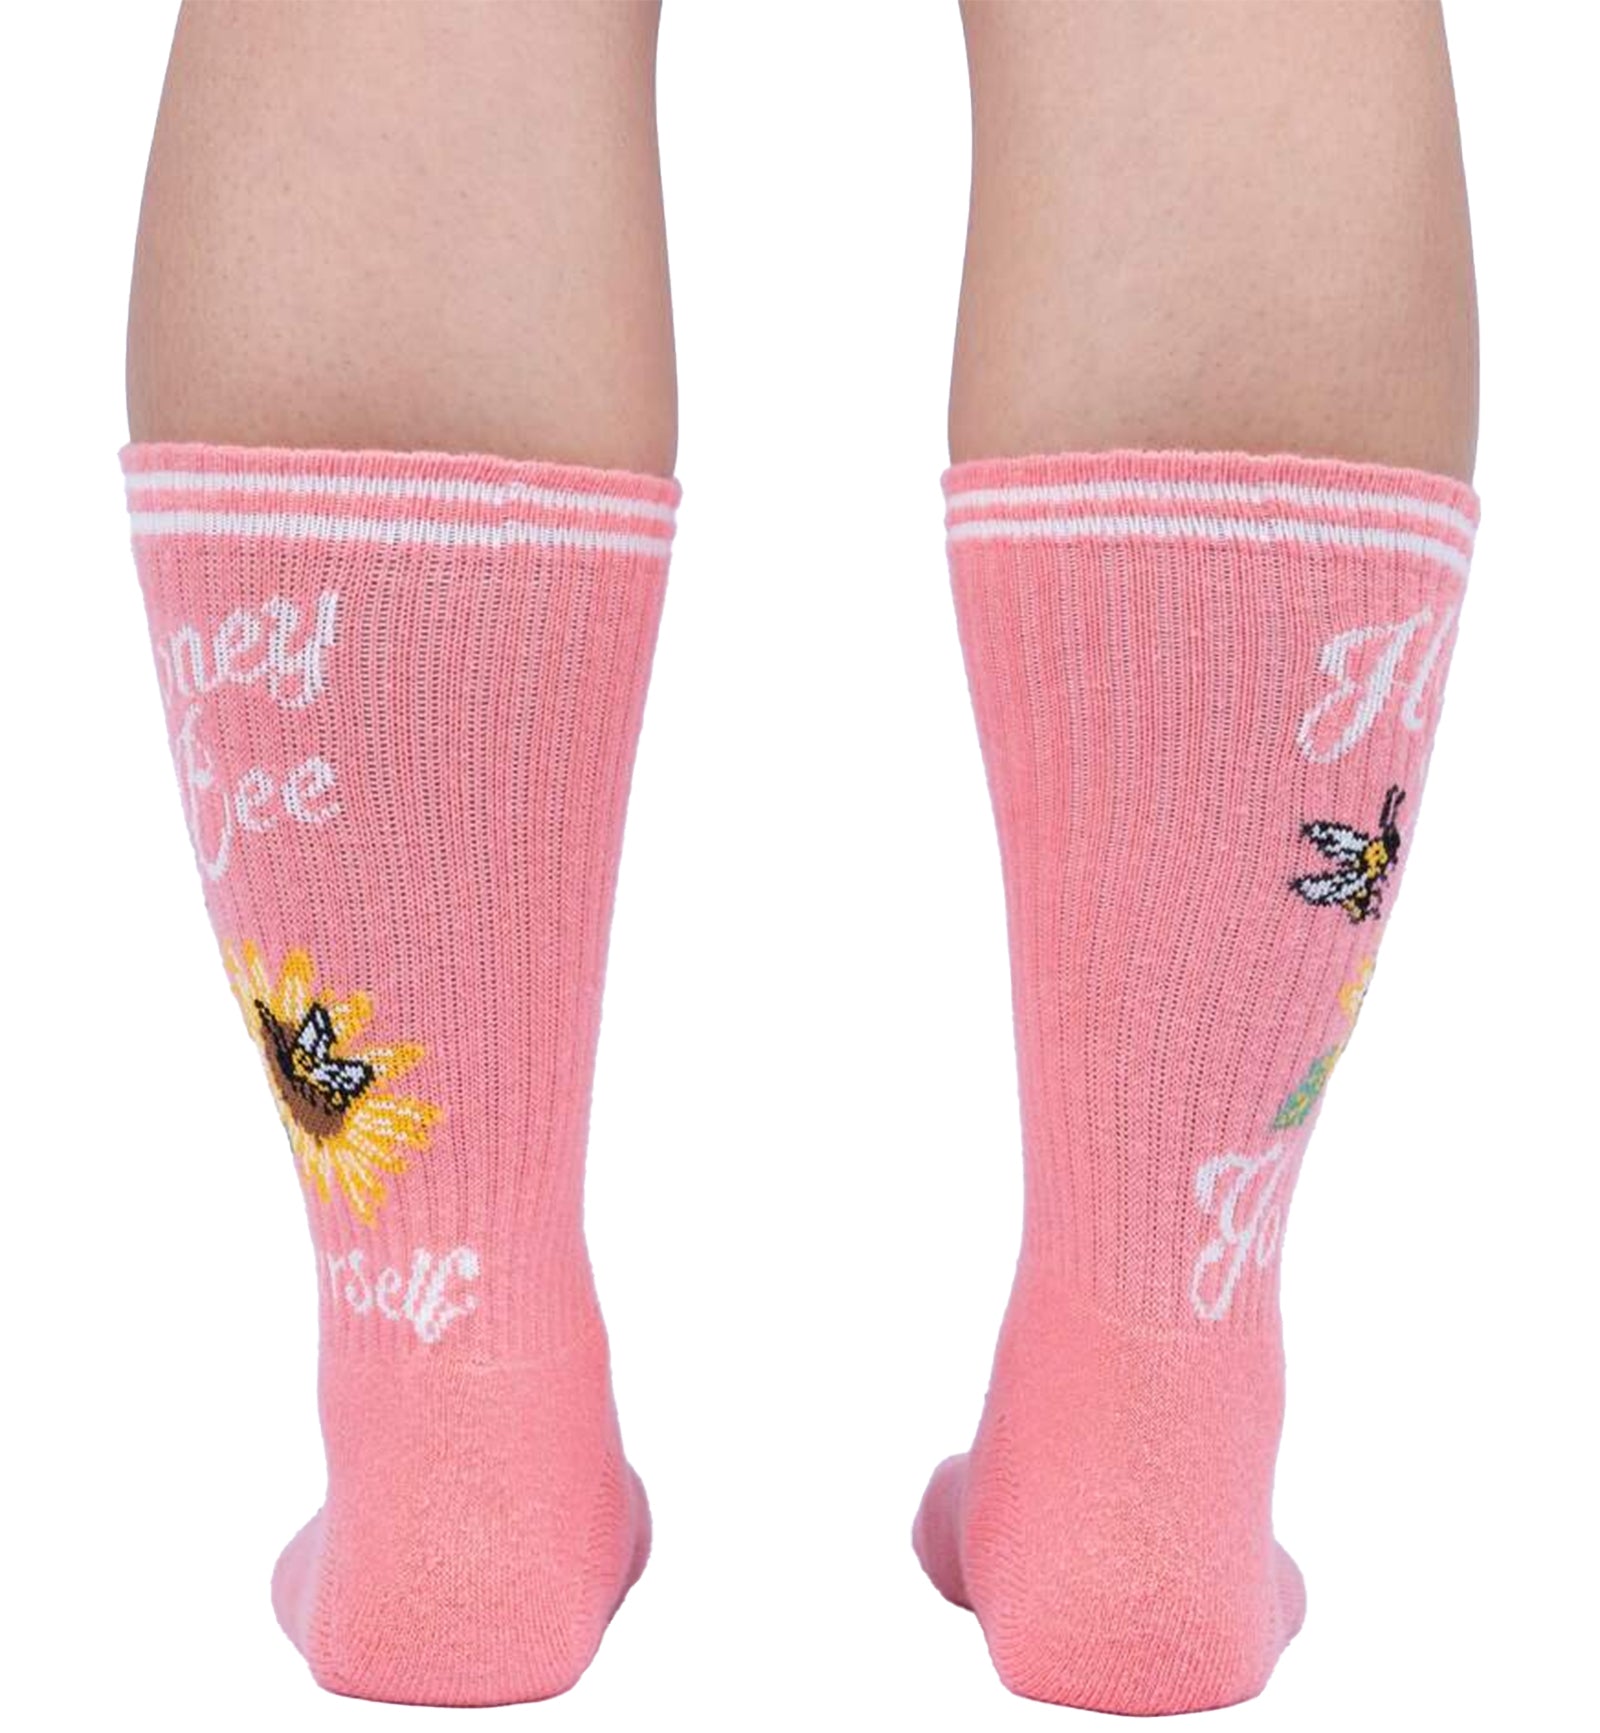 SOCK it to me Athletic Ribbed Crew Socks (R0001),Honey Bee Yourself - Honey Bee Yourself,One Size